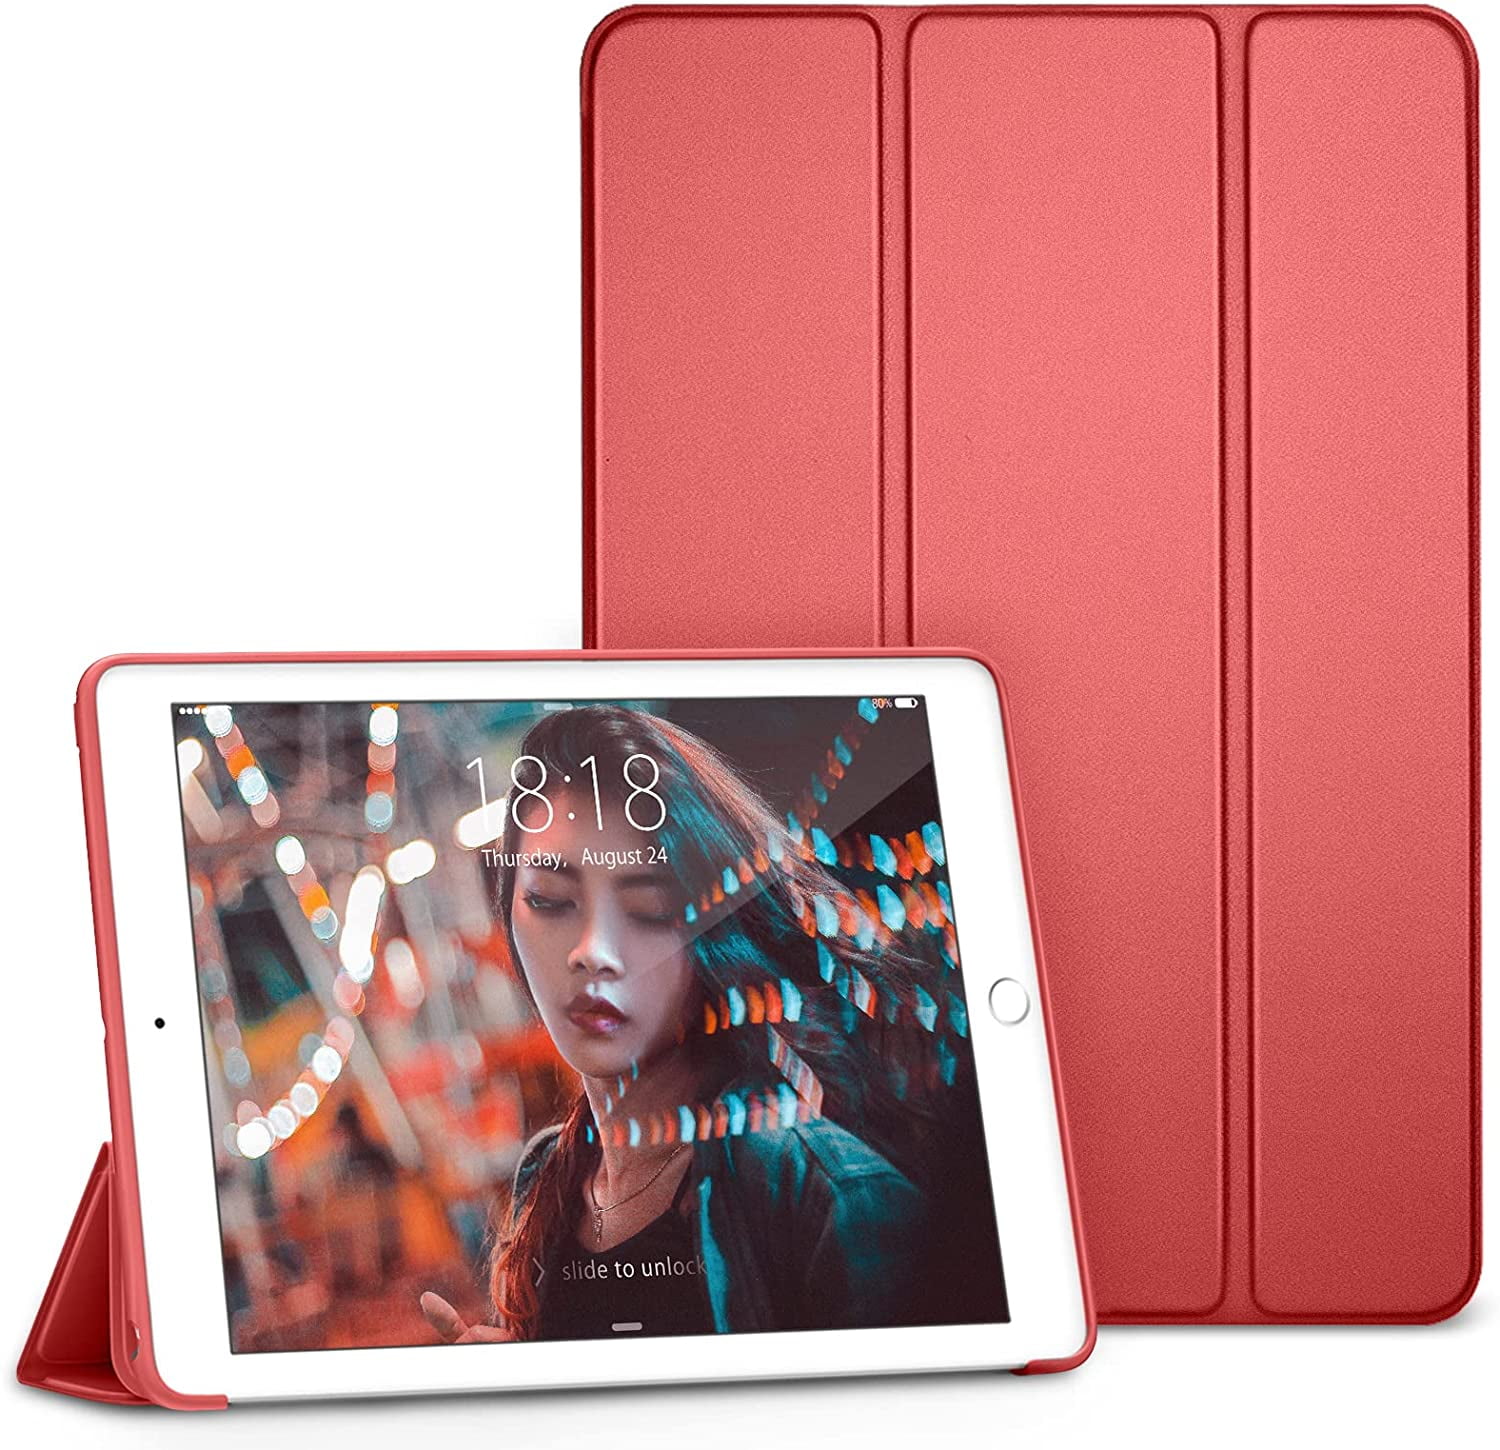 overskydende Vejfremstillingsproces Planet DTTO iPad 9th/ 8th/ 7th Generation 10.2 Case, Ultra Lightweight Slim  Protective Soft Back Cover Smart Trifold Stand [Auto Sleep/Wake], Wine Red  - Walmart.com